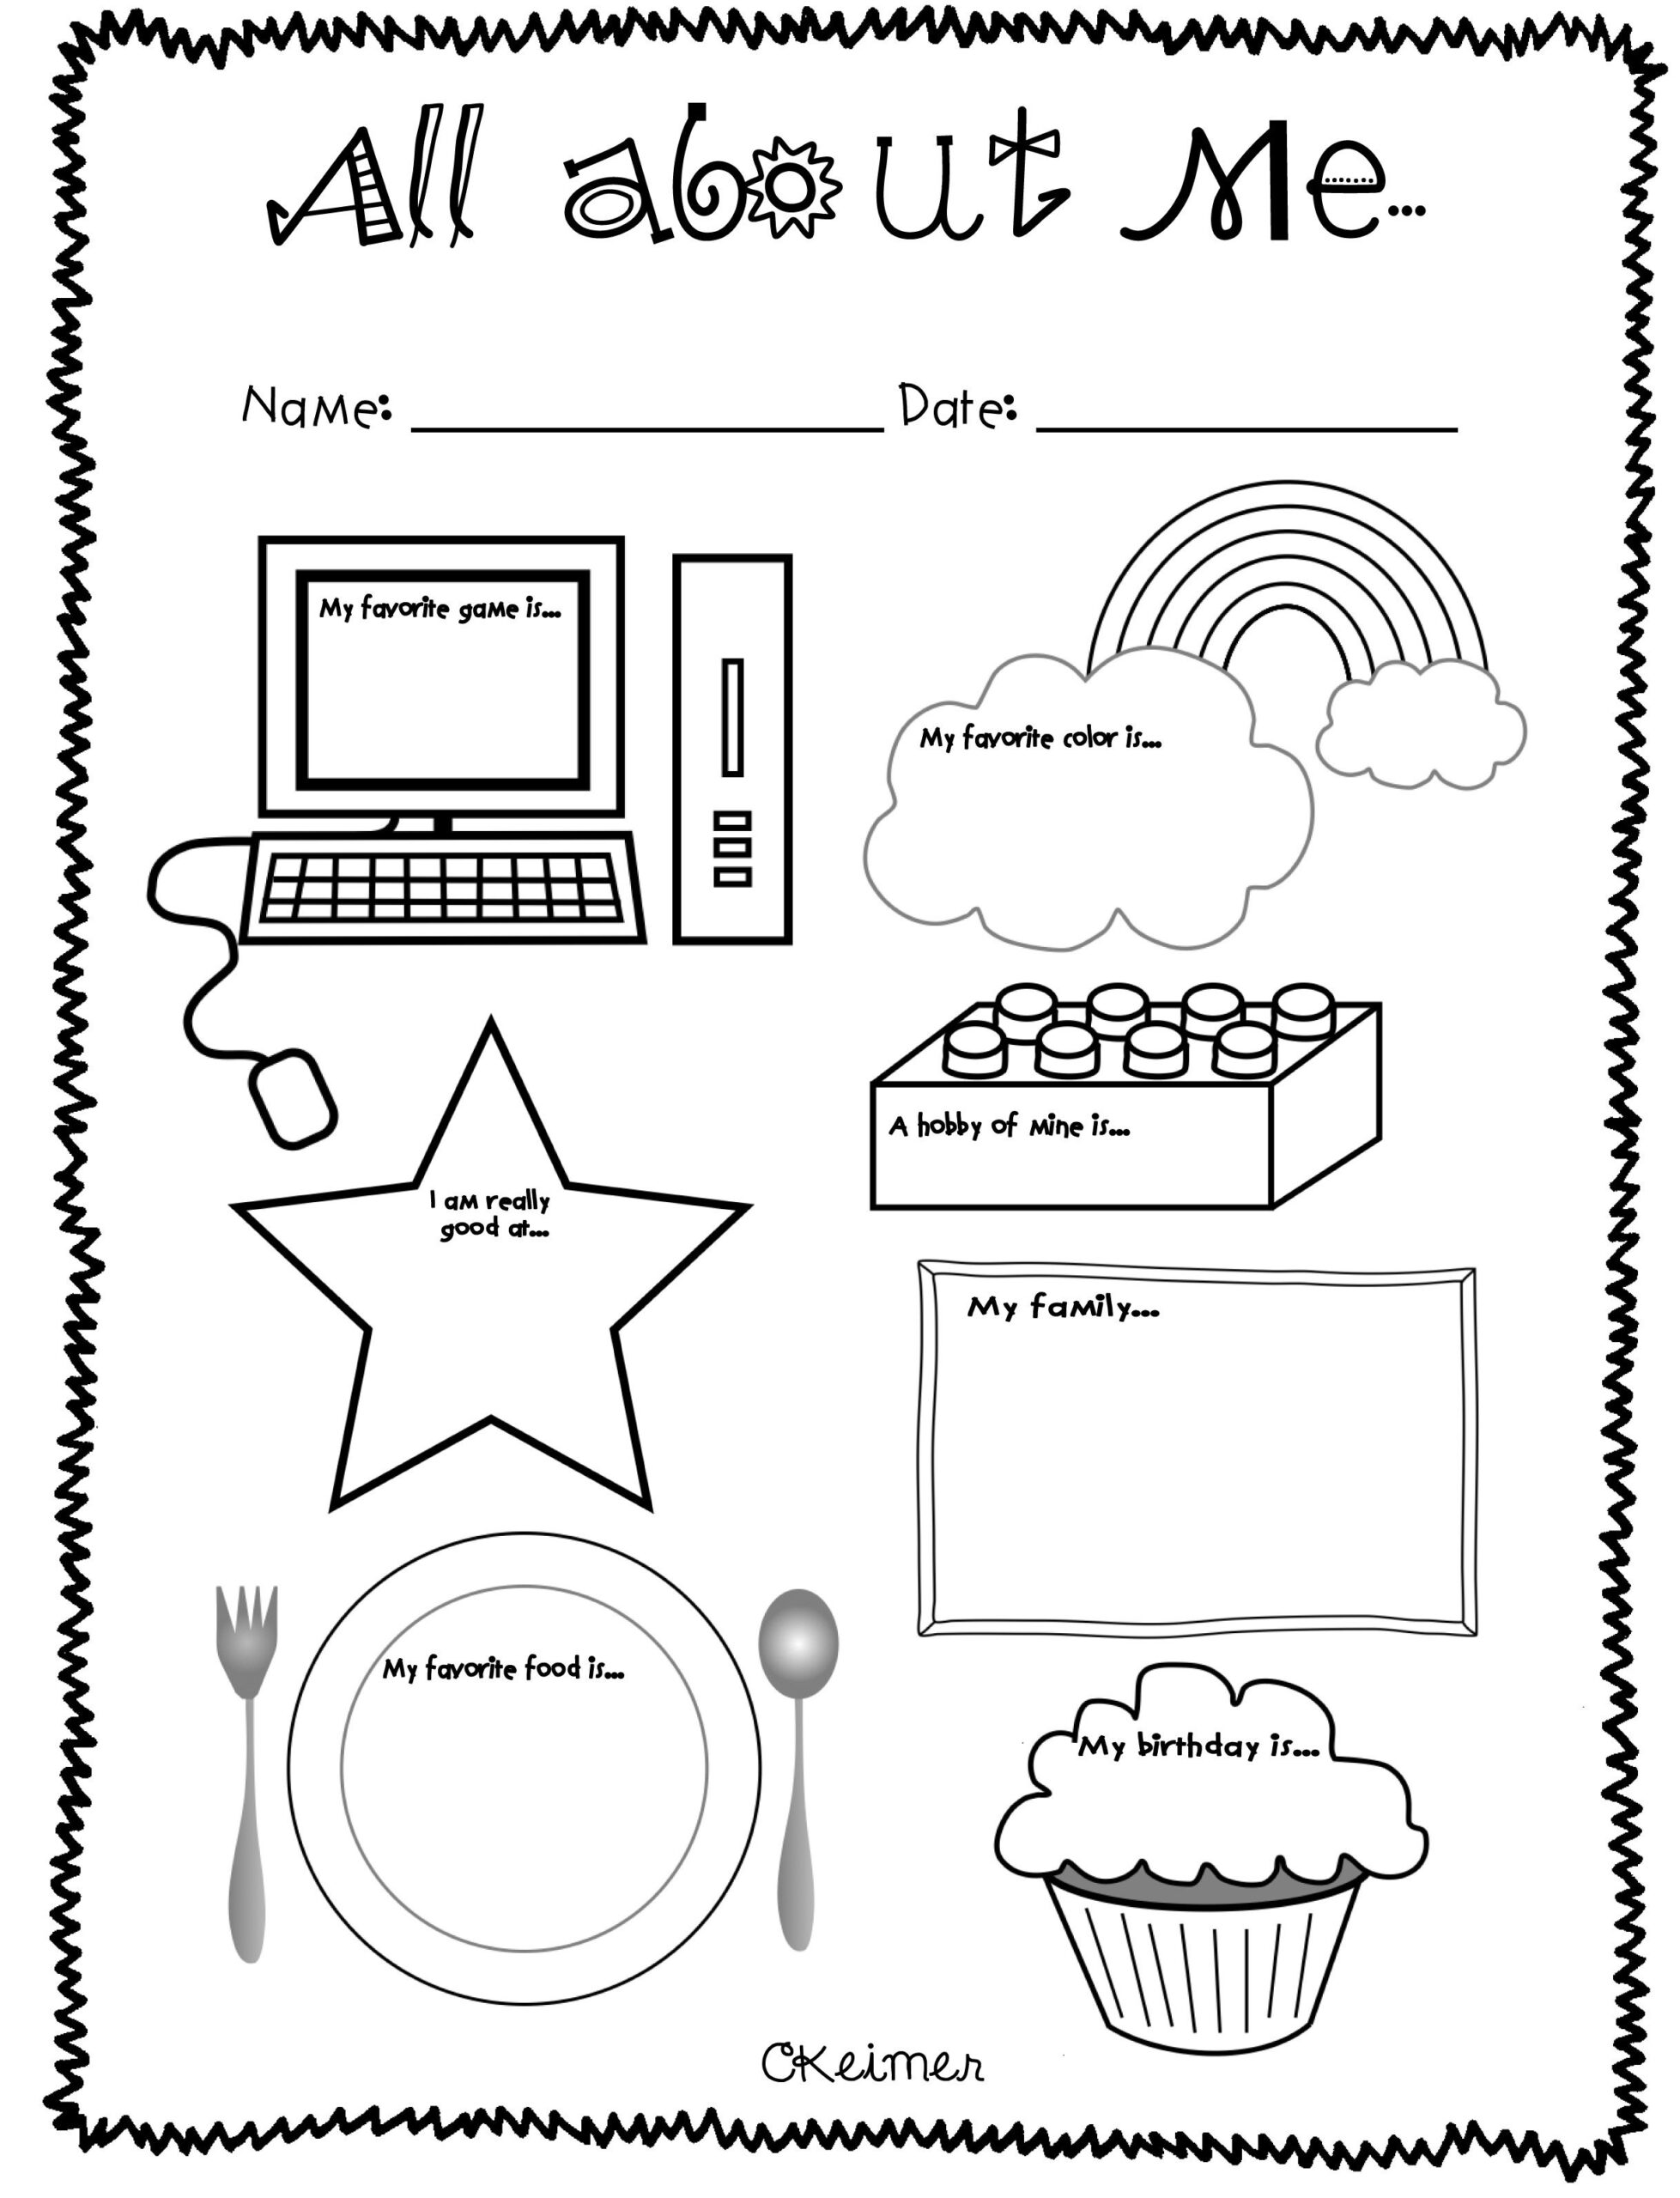 All About Me Getting To Know Students 2 Kindergarten Worksheets 1 Scaled 